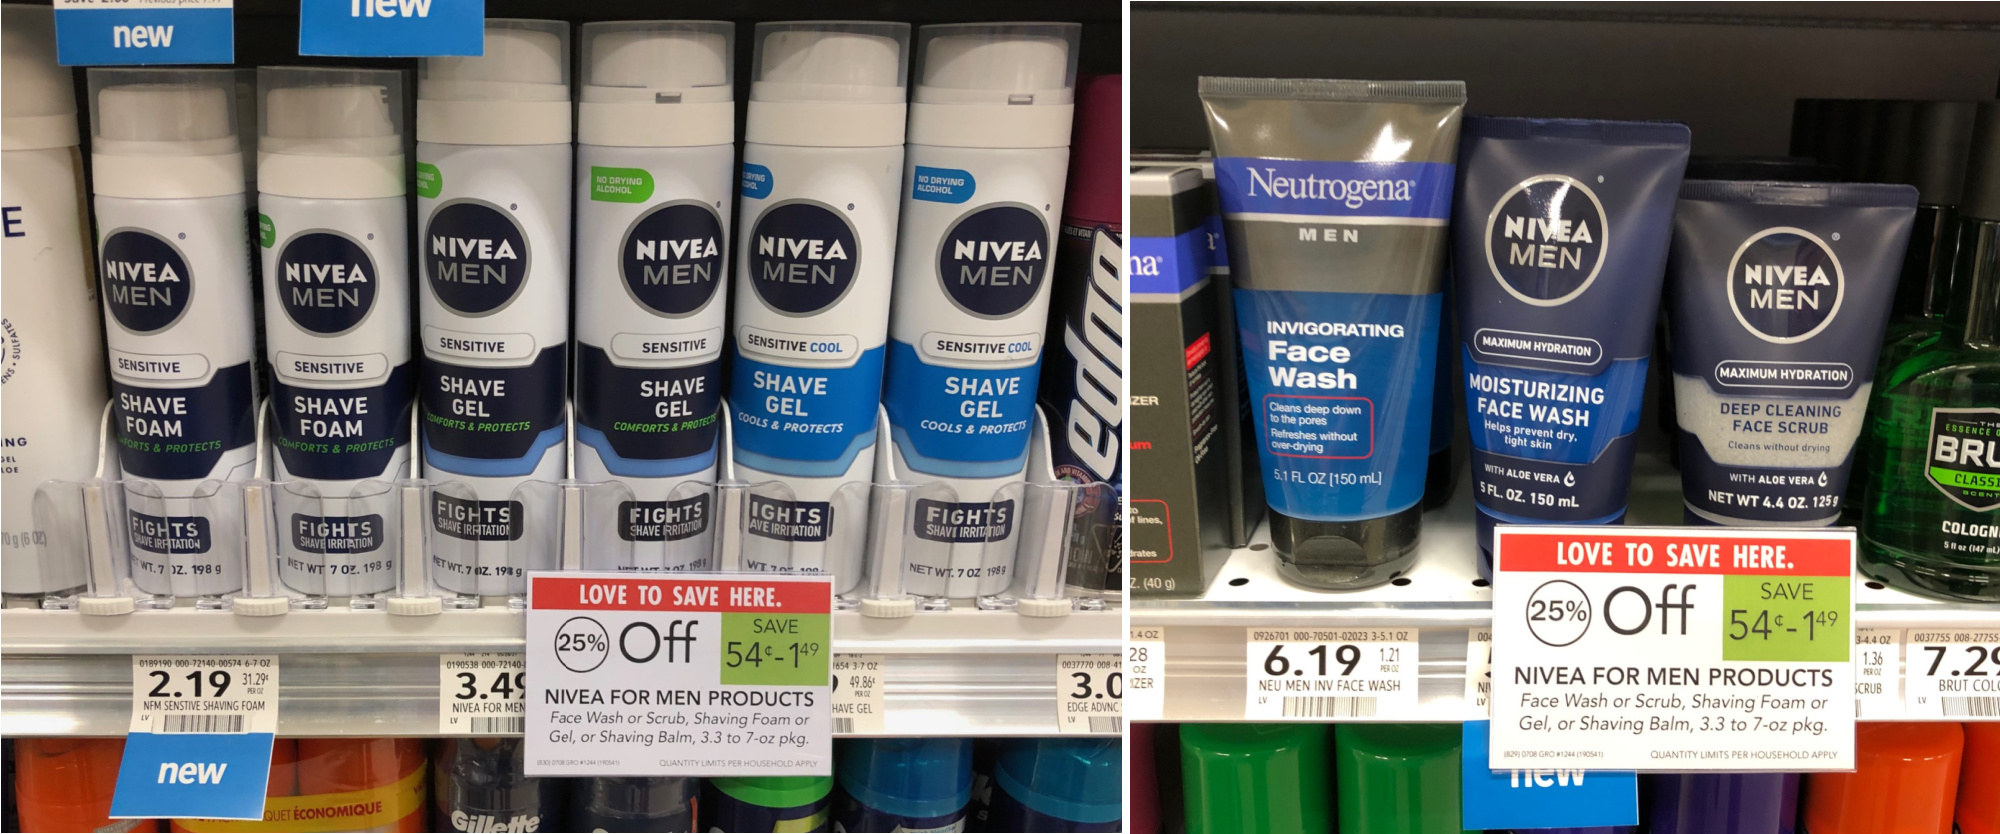 Lots Of Deals On Nivea Men Products Available Now At Publix - Shave Foam Just 64¢ on I Heart Publix